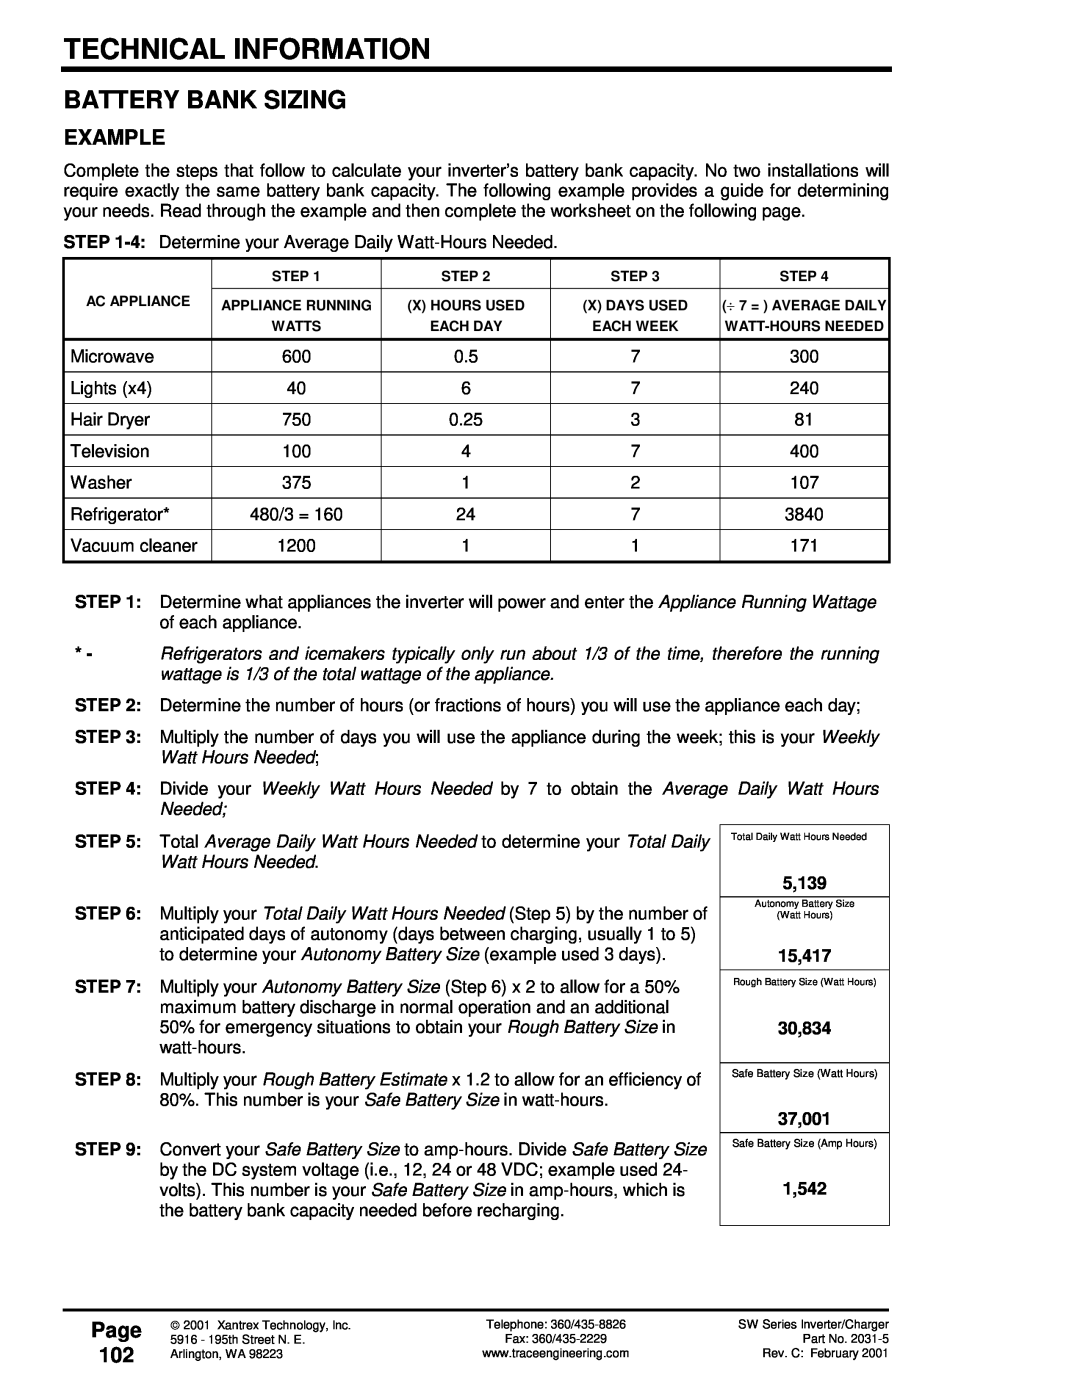 Xantrex Technology 120 VAC/60 owner manual Battery Bank Sizing, Example, Page 102, 5,139, 15,417, 30,834, 37,001, 1,542 